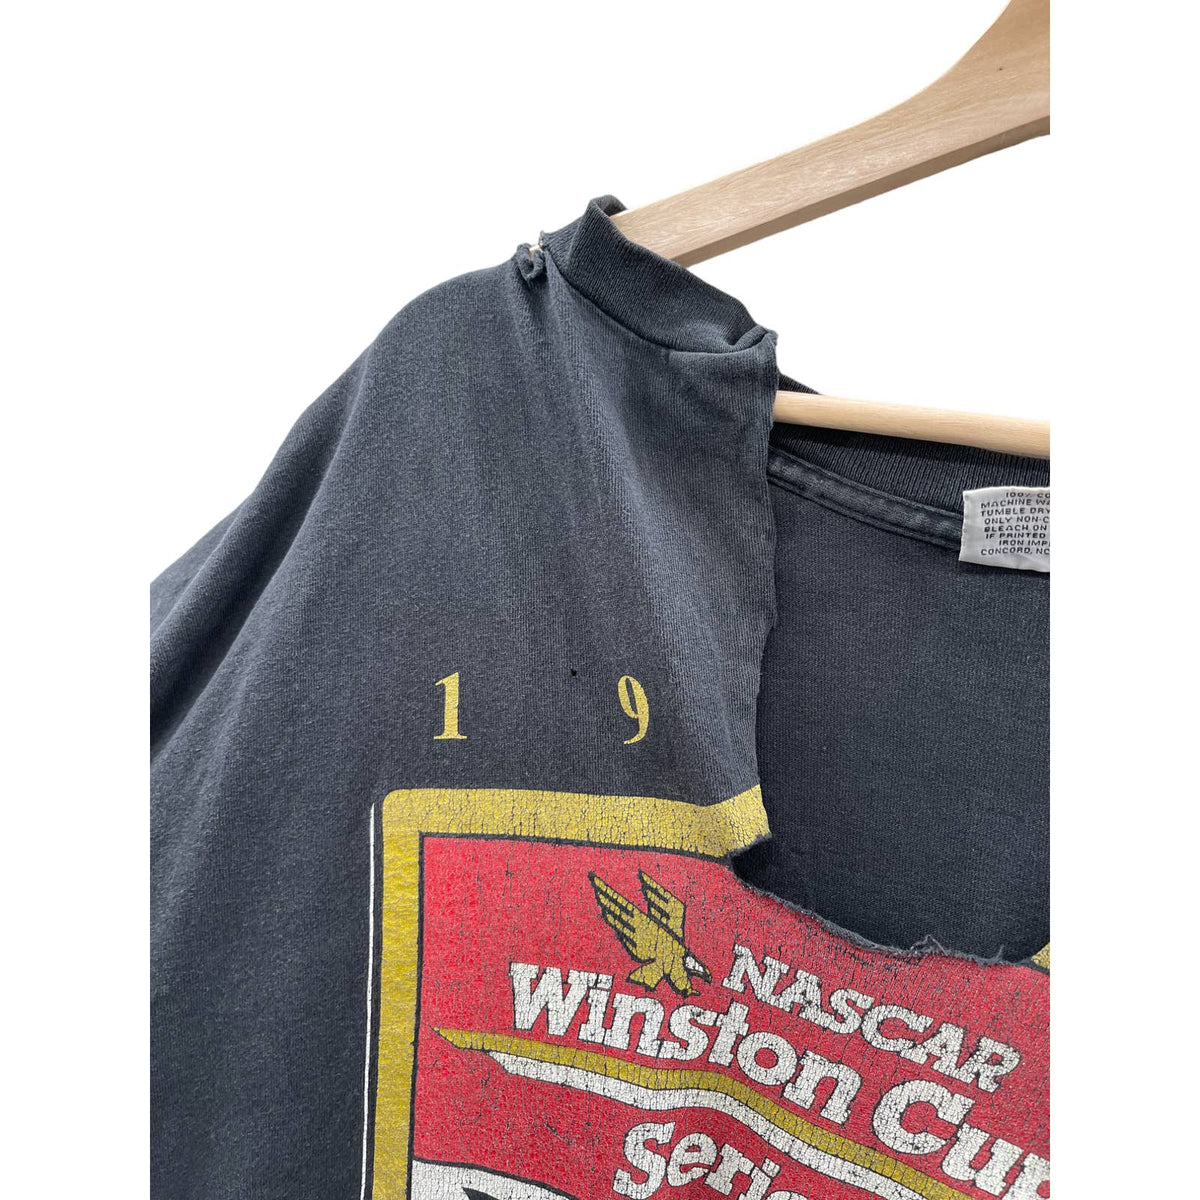 Vintage 1996 Nascar Winston Cup Series Distressed Graphic T-Shirt